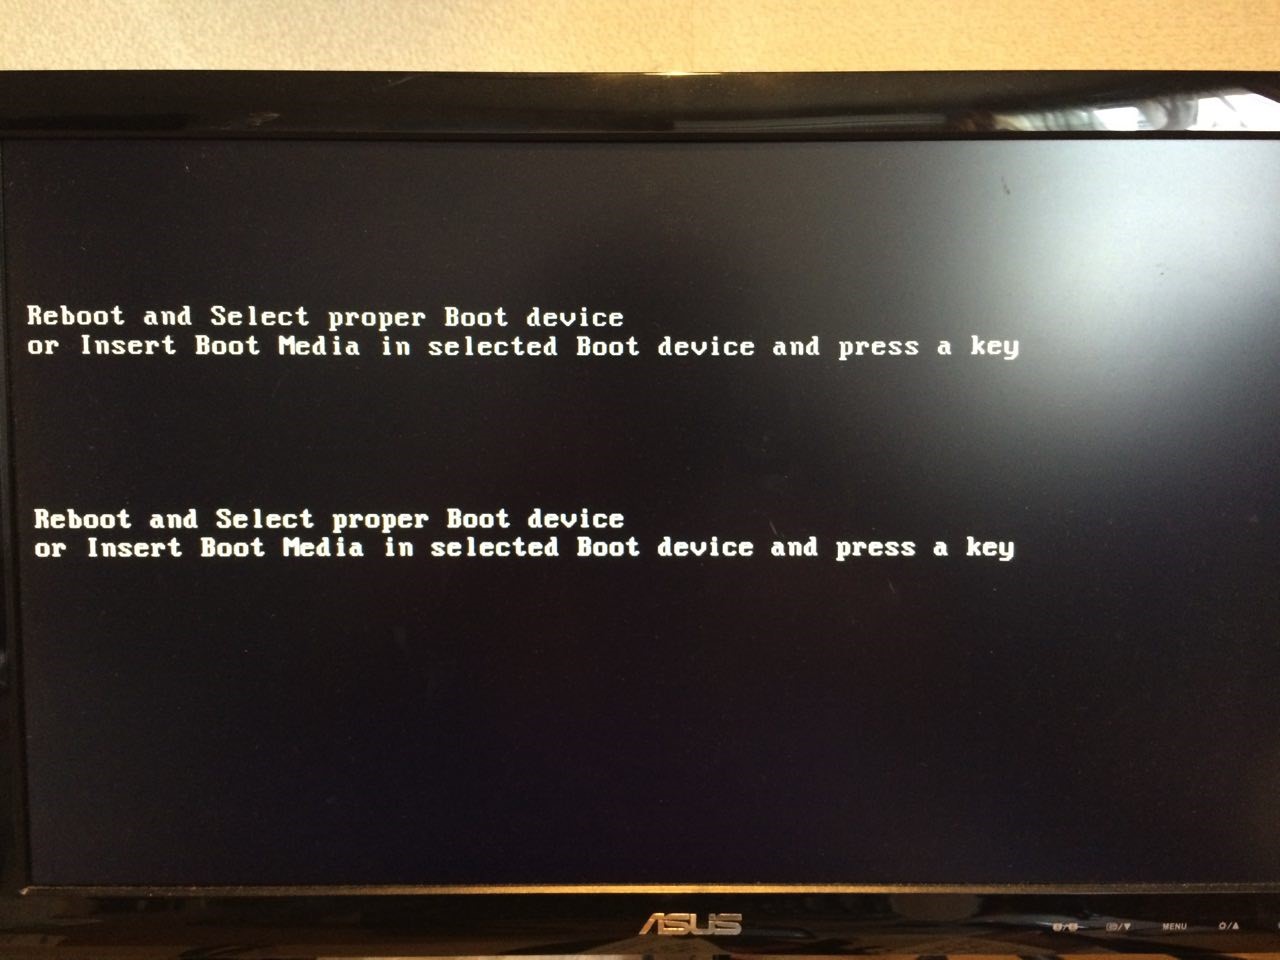 Fix error “Reboot and select proper boot device or insert boot media in selected boot device”